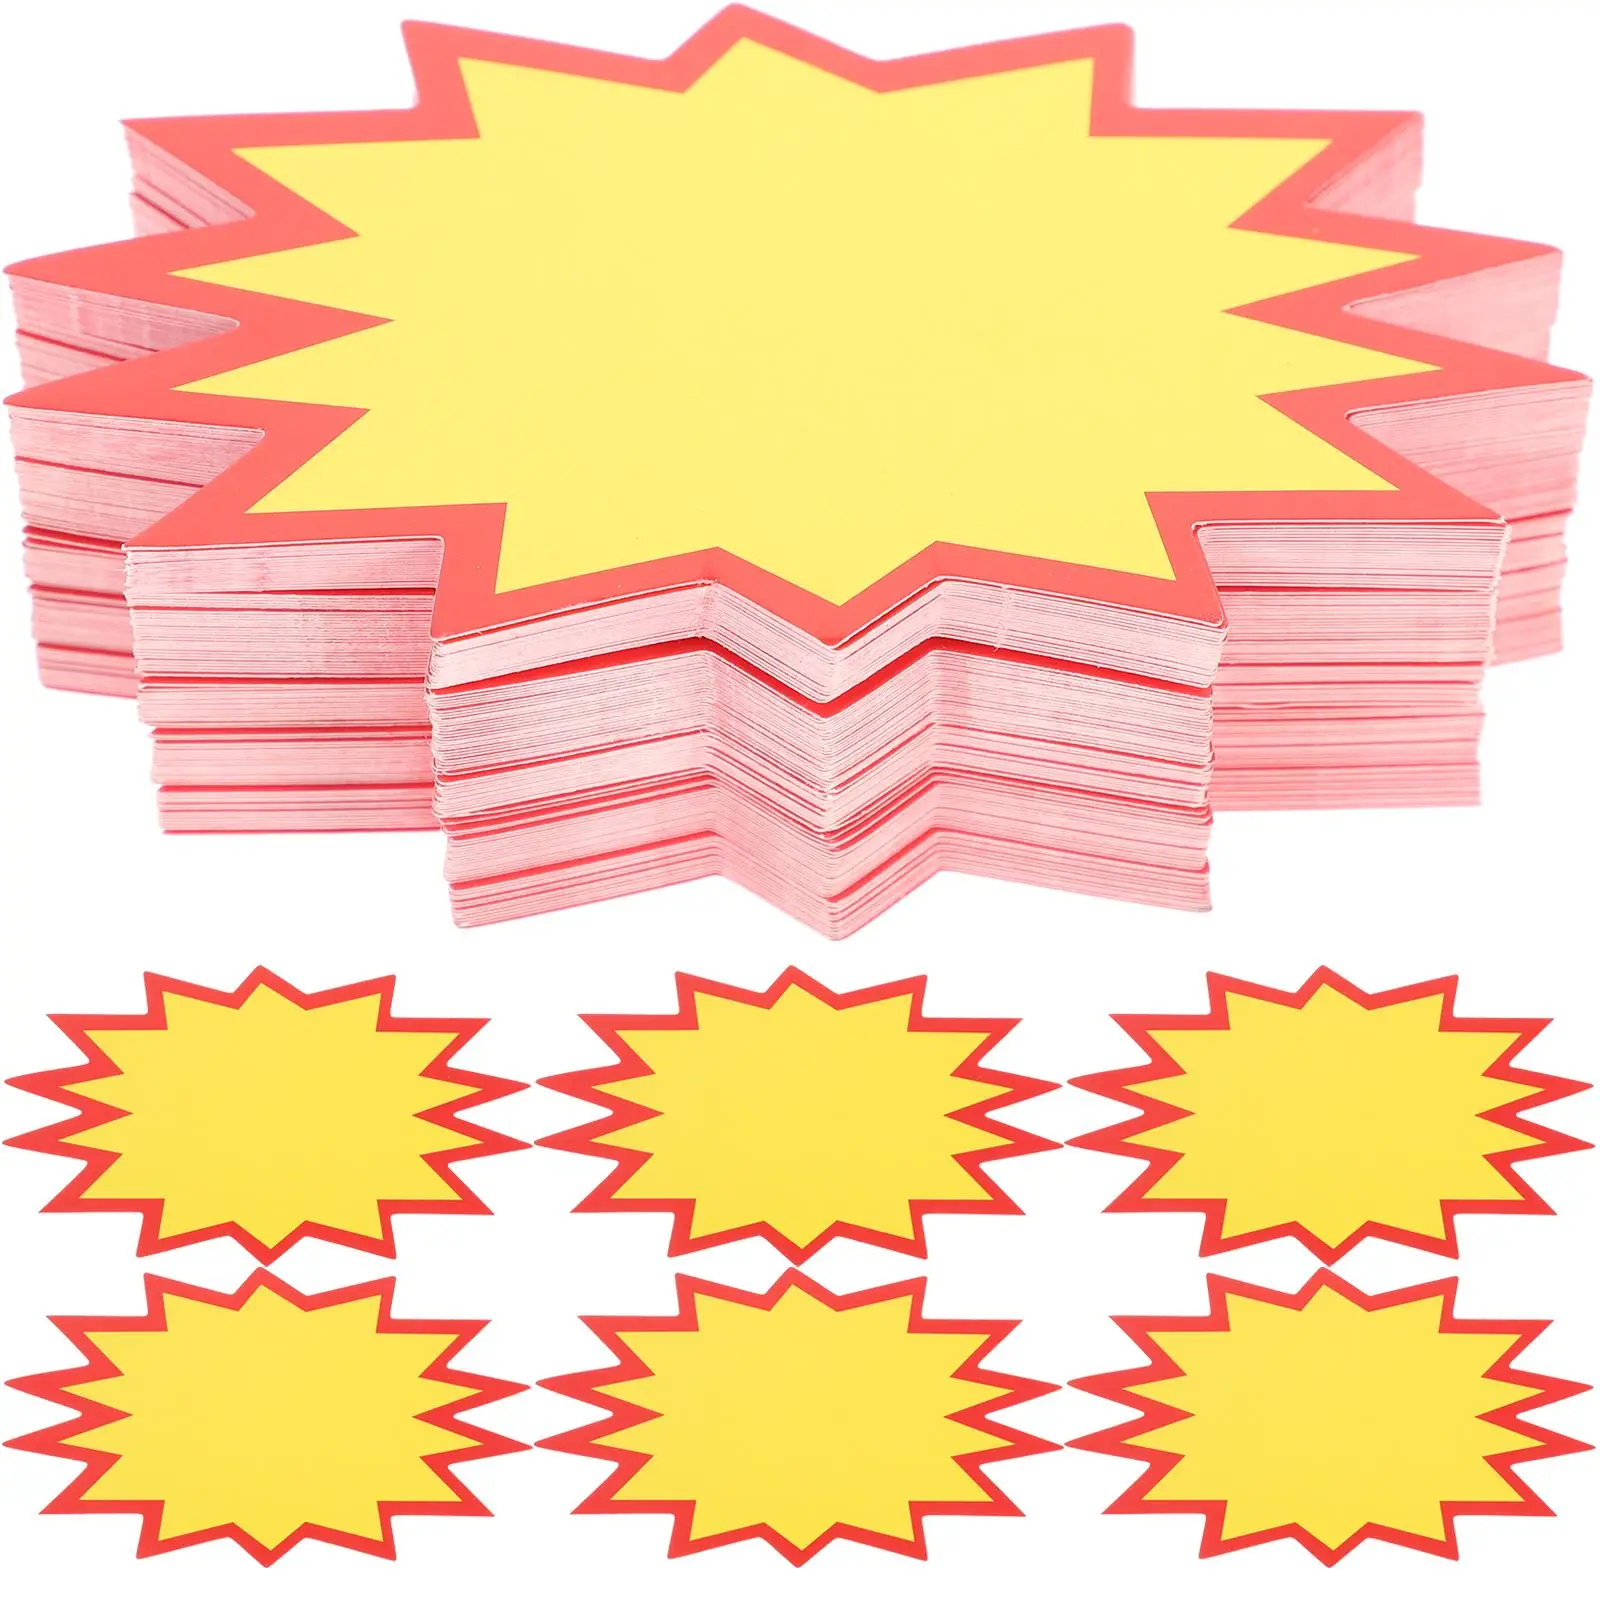 100Pcs Price Tag Advertising Paper Explosion Sticker Signs Price Tags Sales Price Label Tags For Supermaket Store 11x6cm 200pcs pop explosion poster promotions sale paper card board price label tag signage store display advertising